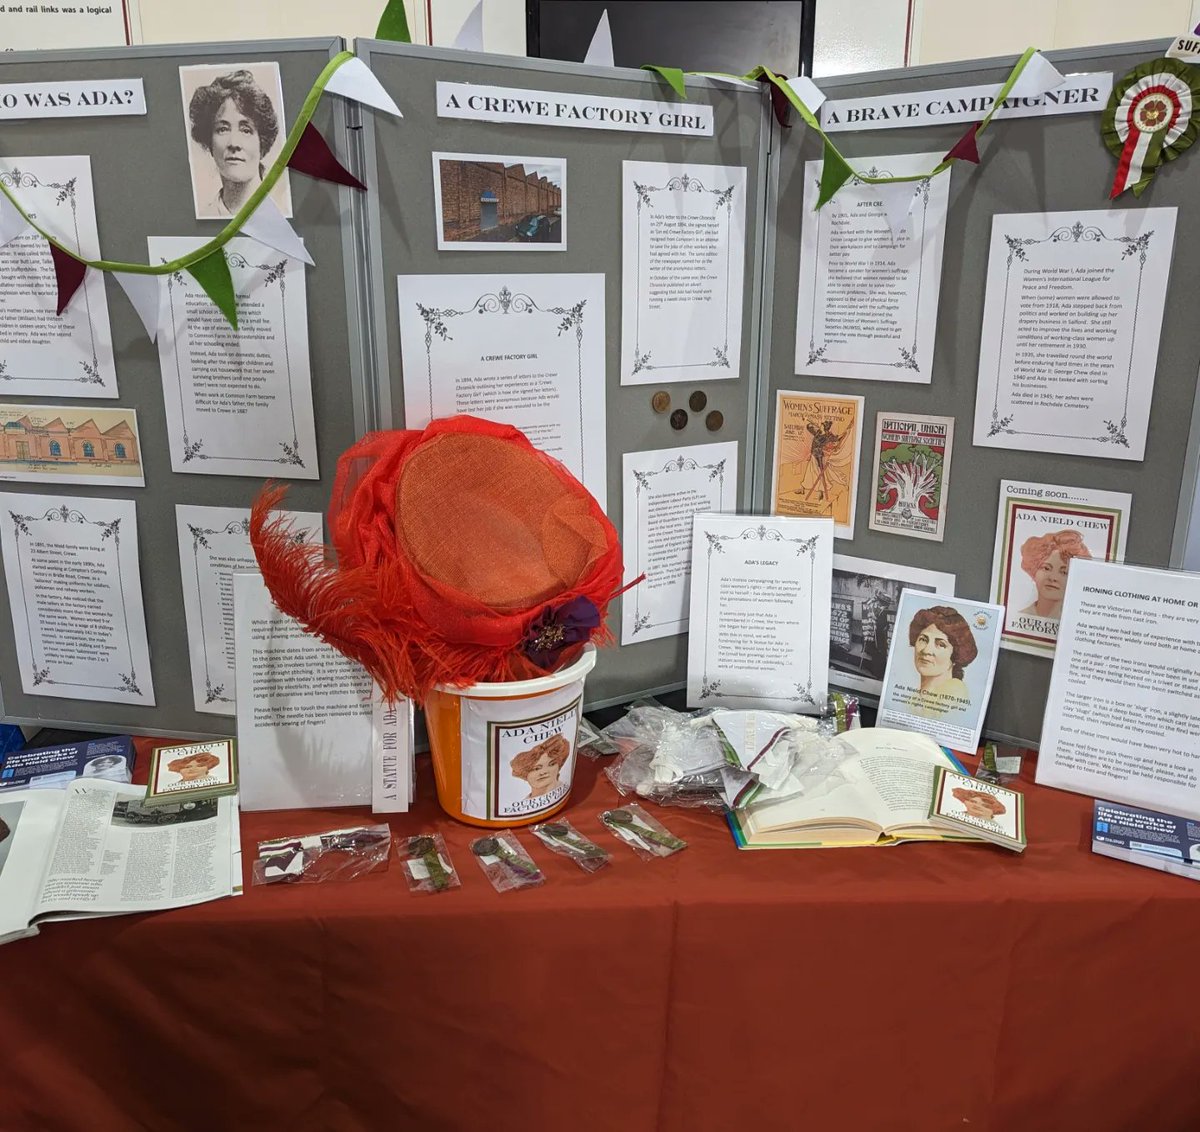 It's been great having our #ada stand at @CreweHC today as part of #heritageweek #HeritageOpenDays So many people interested in how they can help. We are going to put a working group together please email in cheshirewomenscollaboration@gmail.com #womensstatue #womenshistory